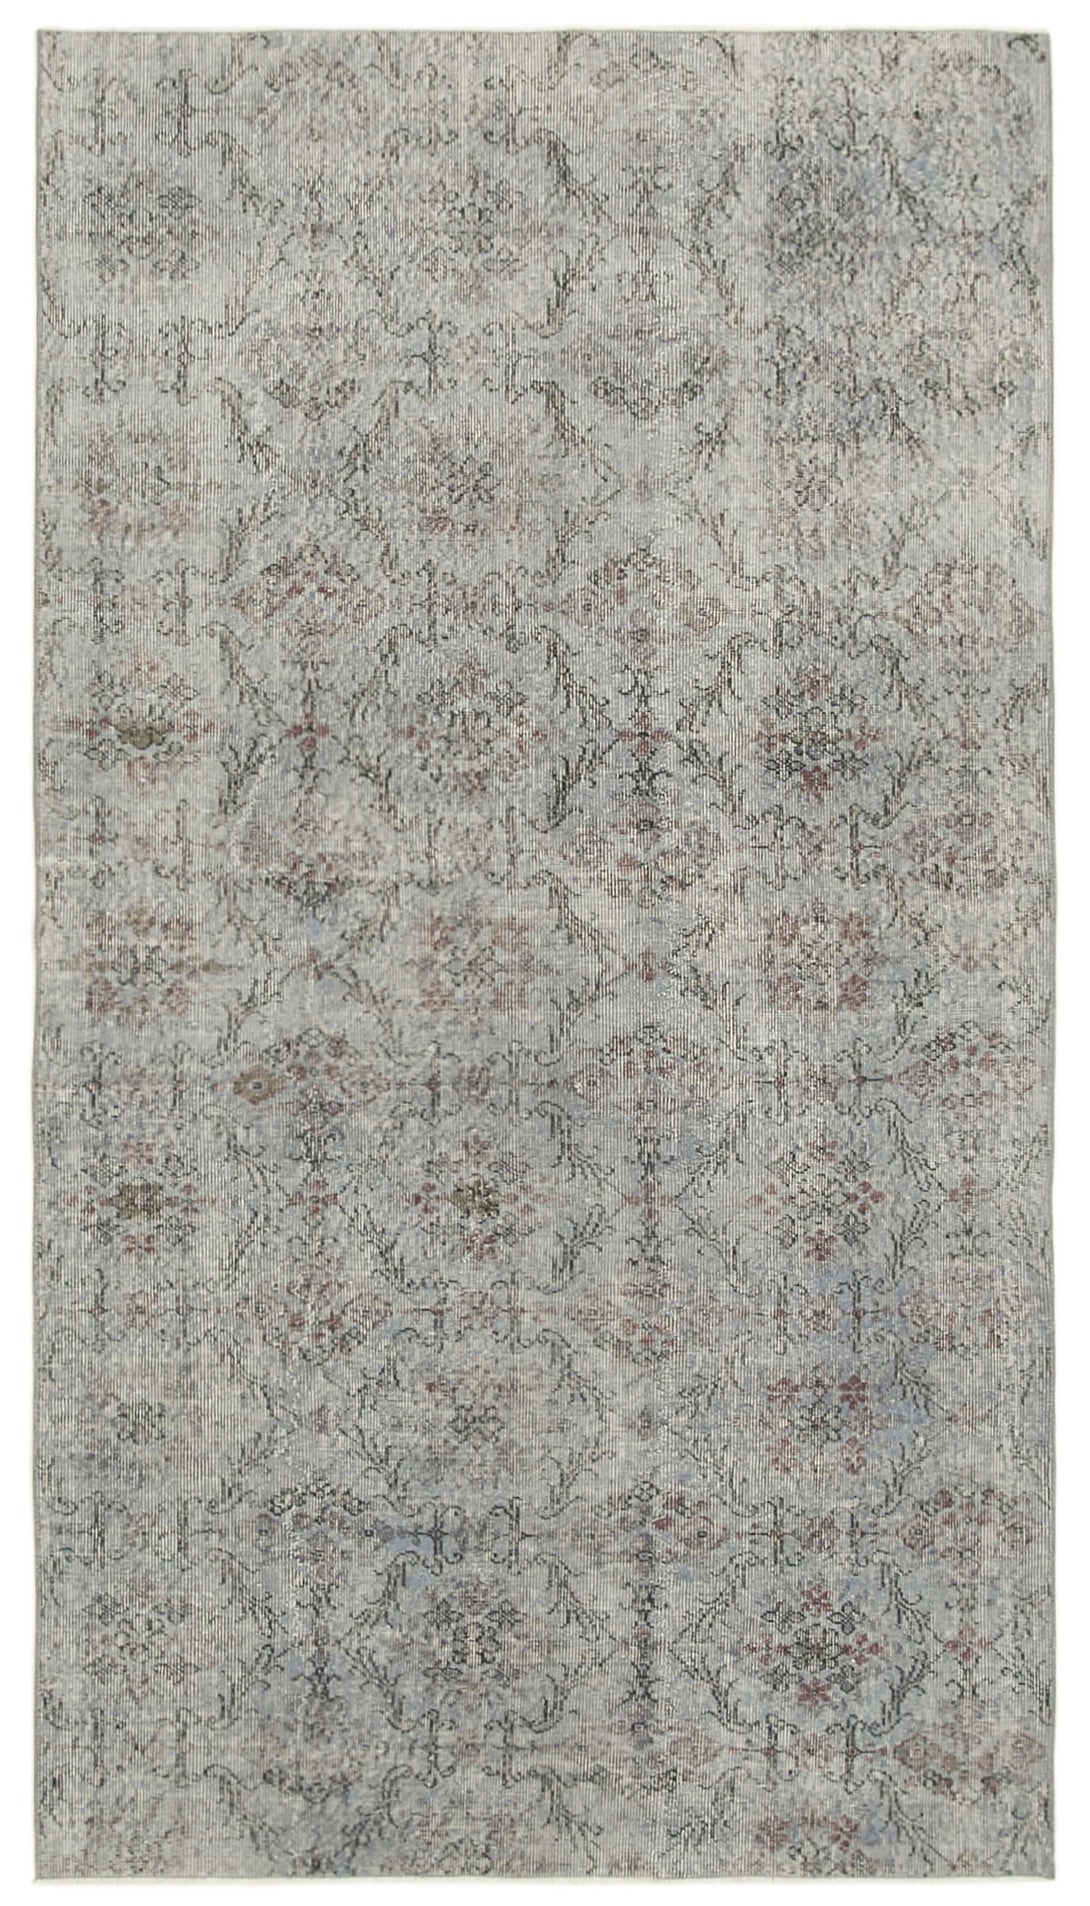 Handmade Overdyed Area Rug > Design# OL-AC-39448 > Size: 4'-10" x 8'-8", Carpet Culture Rugs, Handmade Rugs, NYC Rugs, New Rugs, Shop Rugs, Rug Store, Outlet Rugs, SoHo Rugs, Rugs in USA